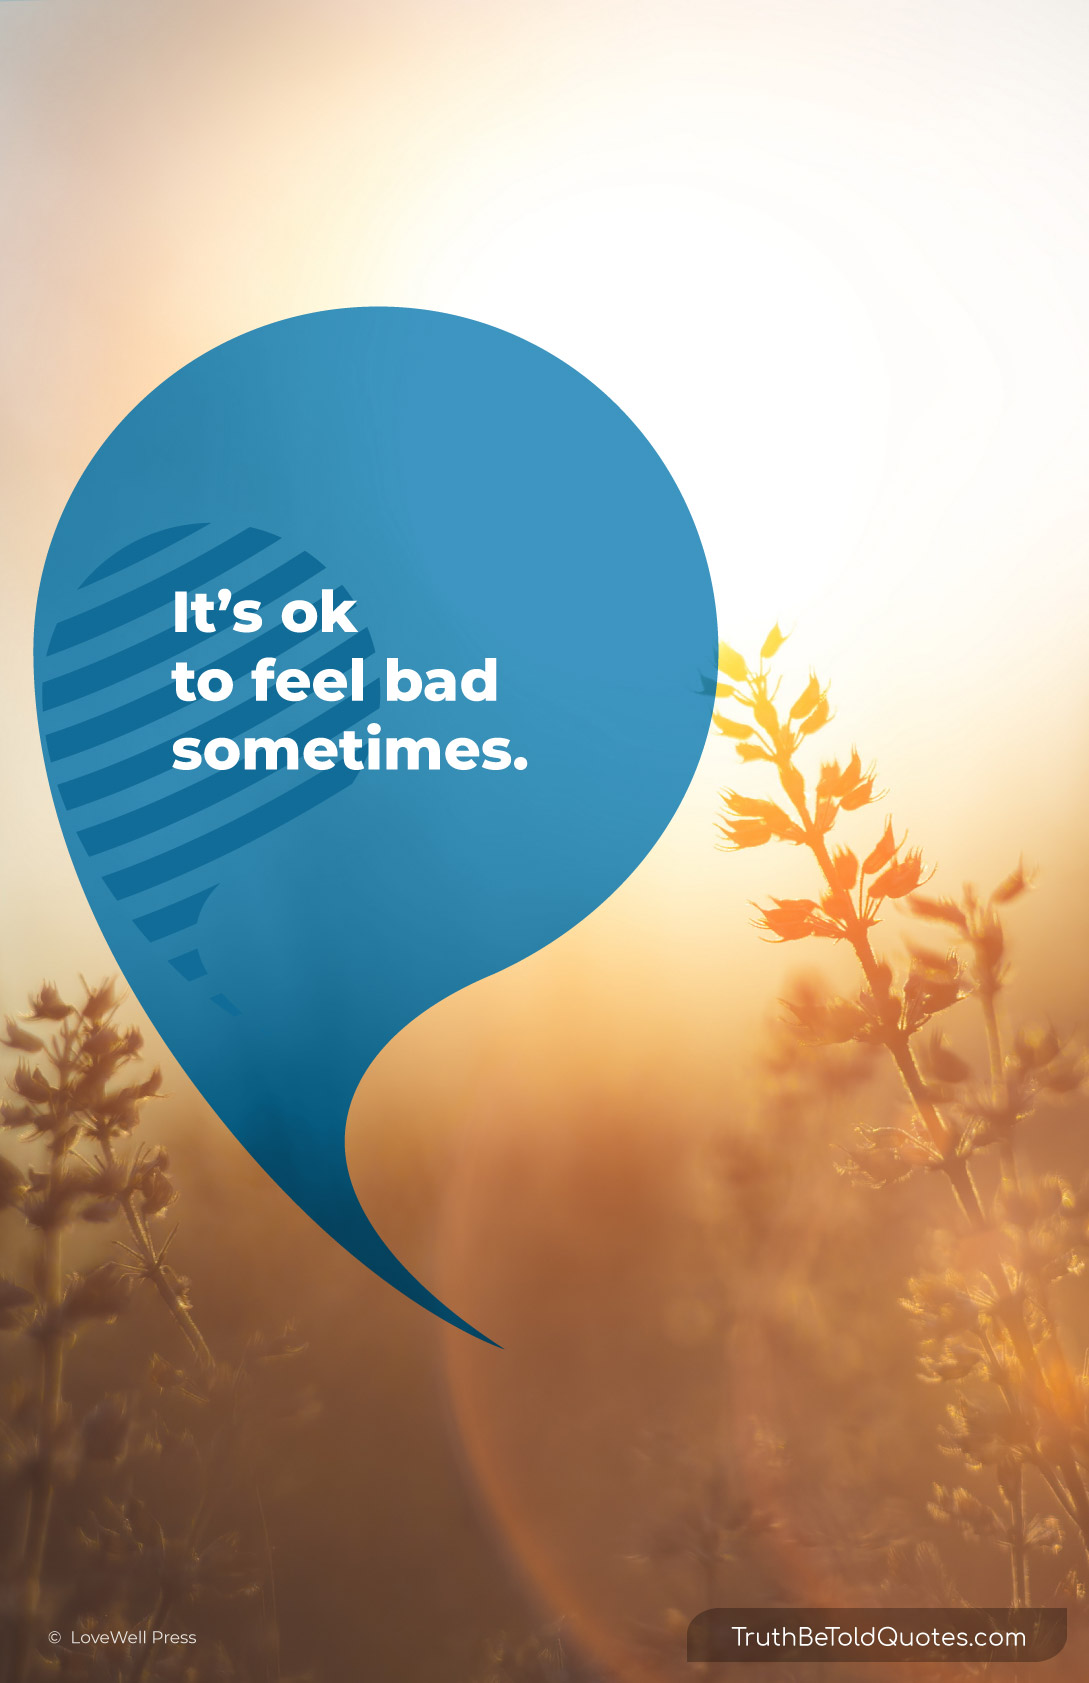 Quote for teens feeling sad -'It's ok to feel bad sometimes'